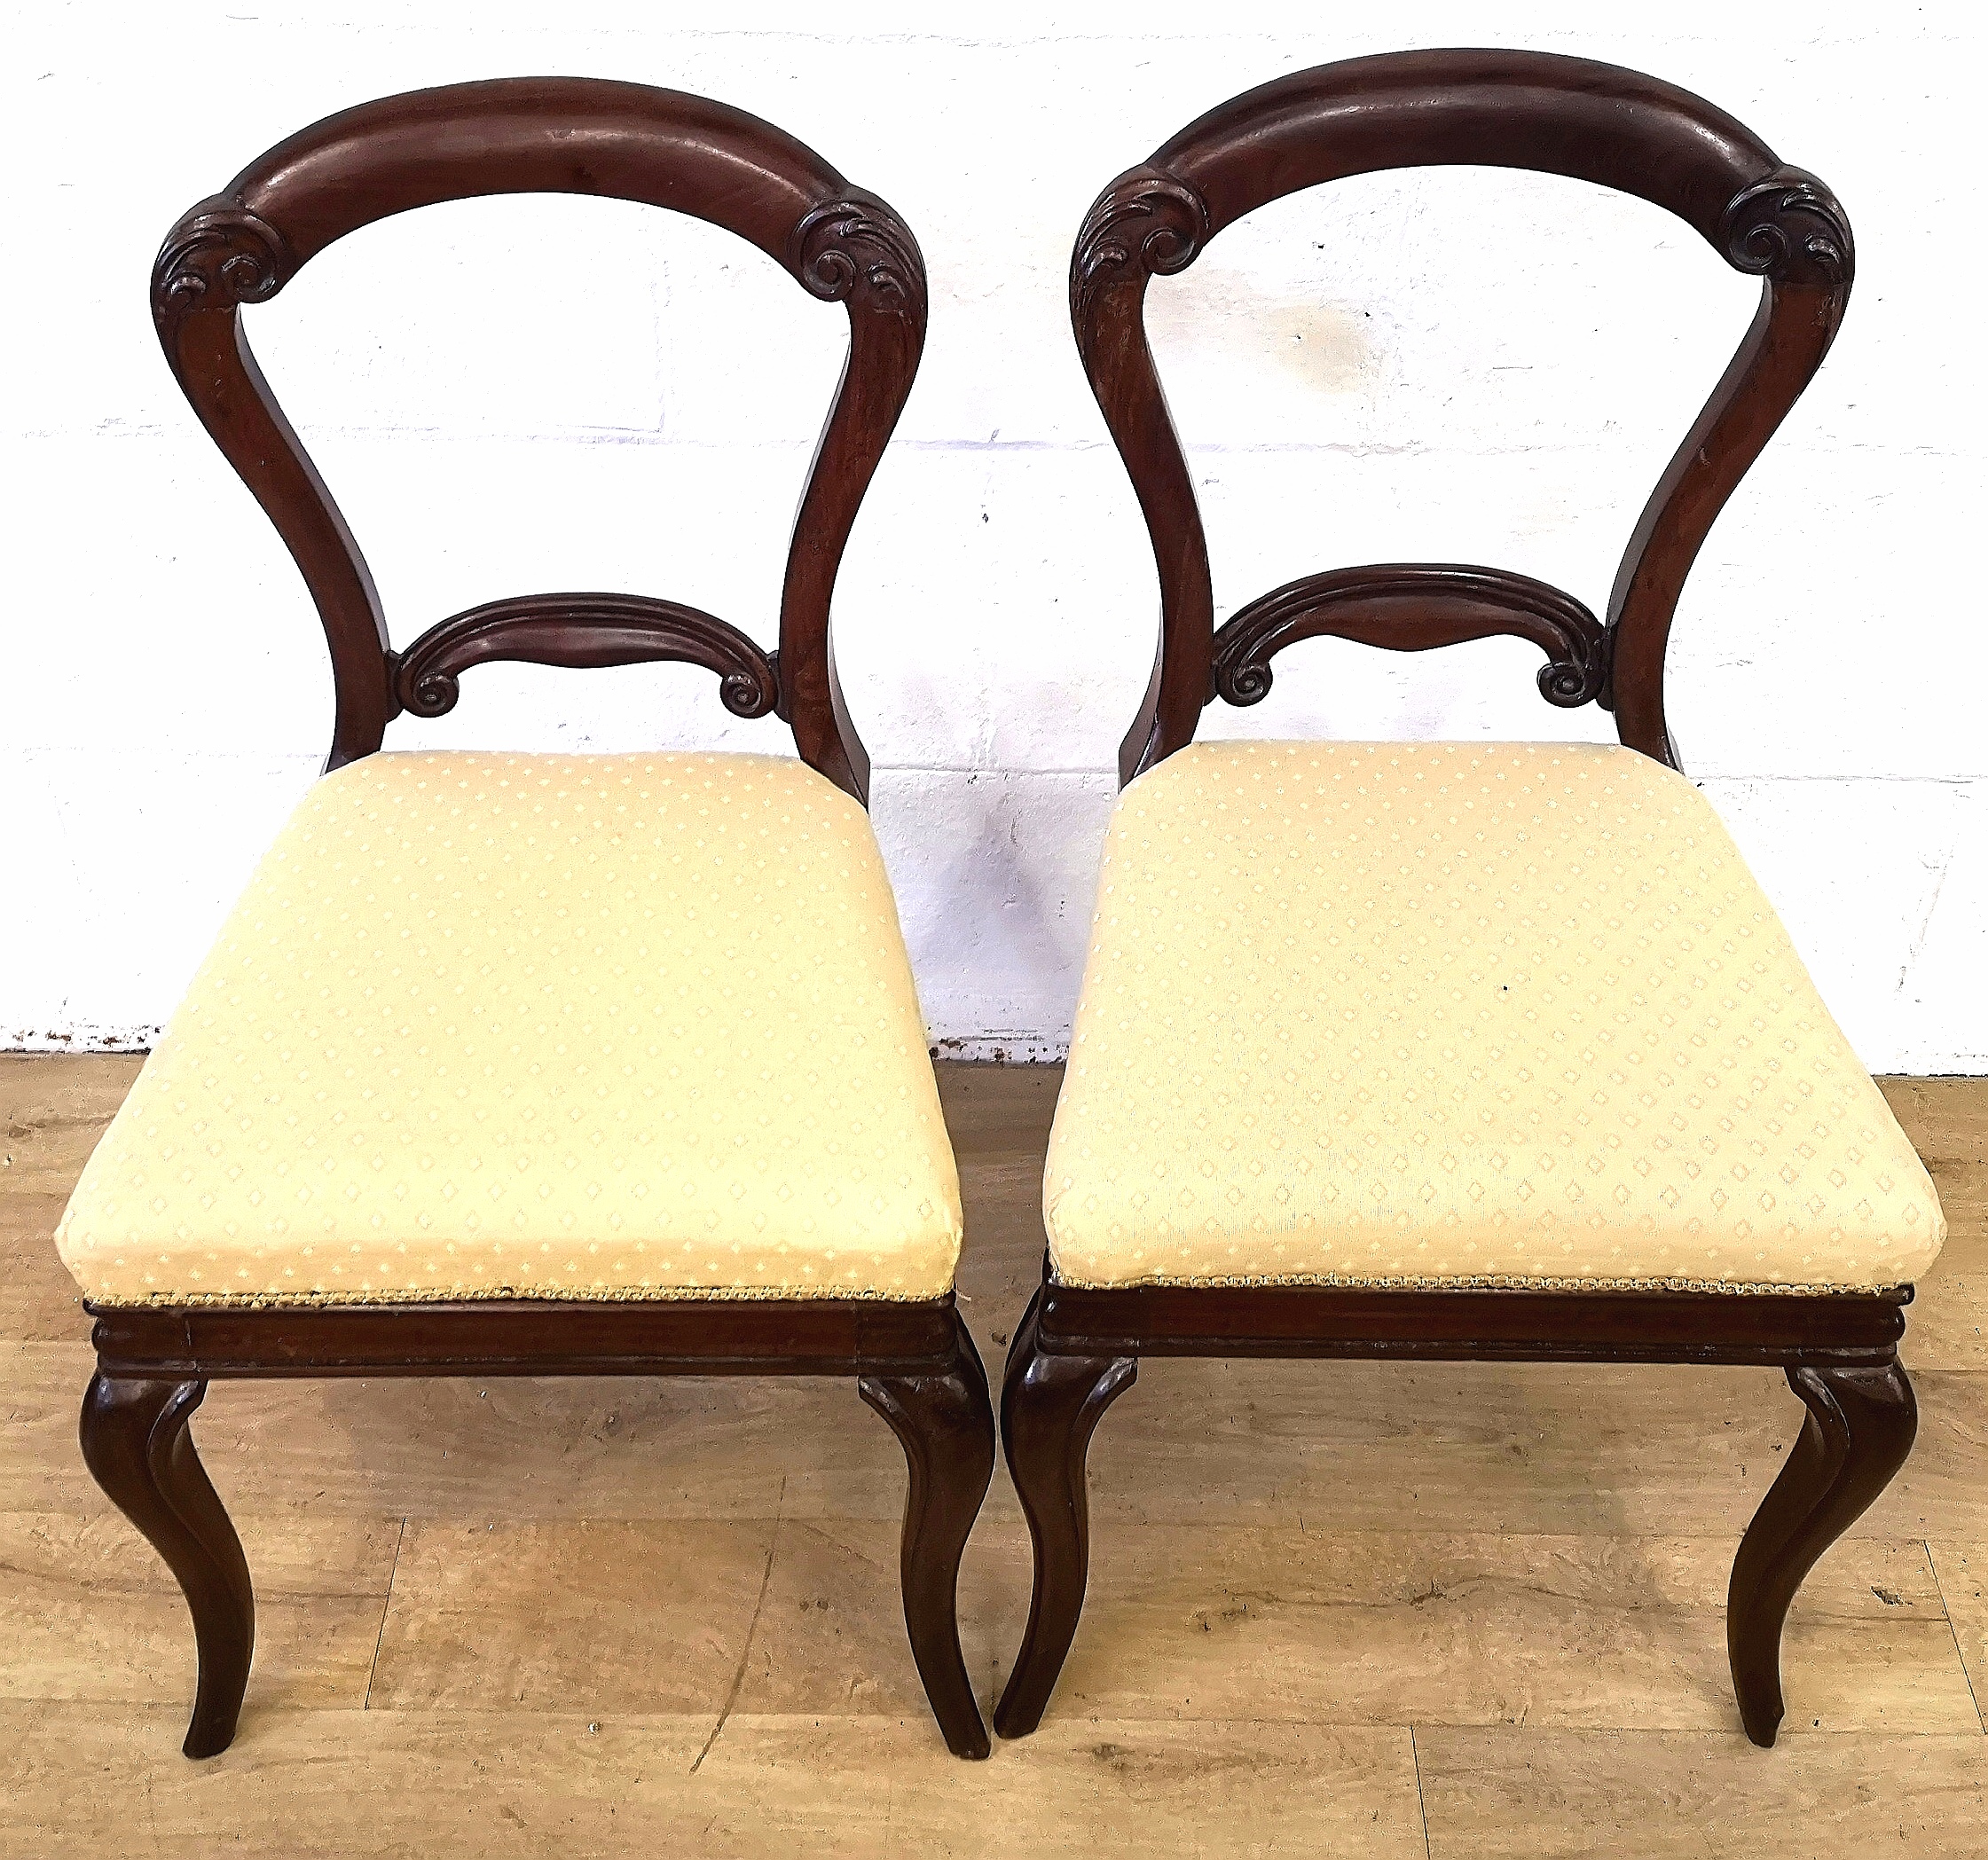 Pair of Victorian mahogany balloon back dining chairs - Image 2 of 6